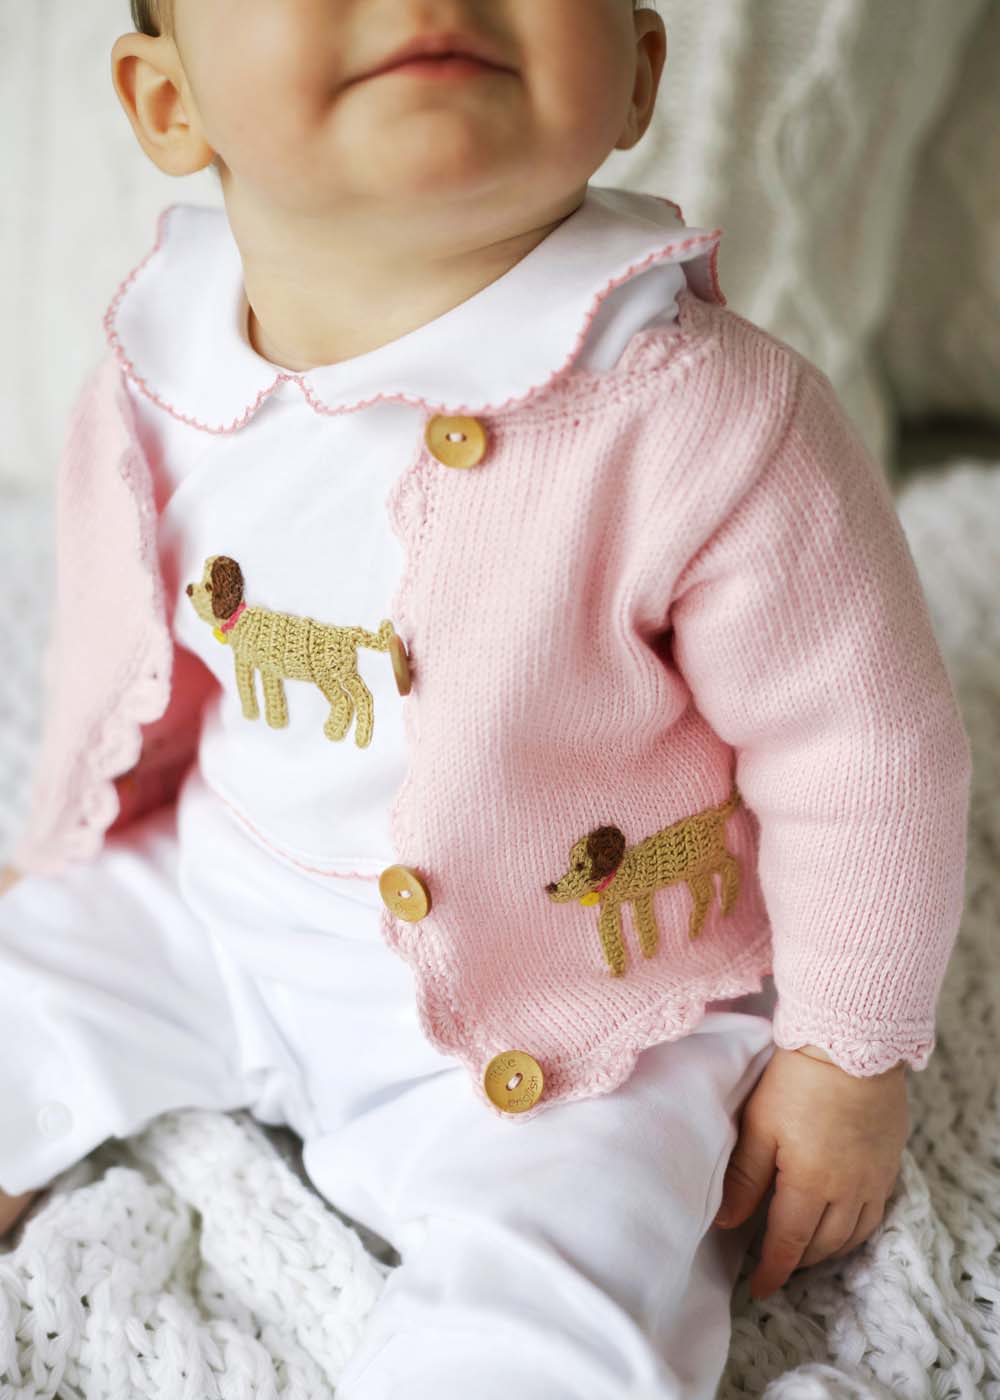 seguridadindustrialcr traditional playsuit with crochet lab dog and pink pique detail